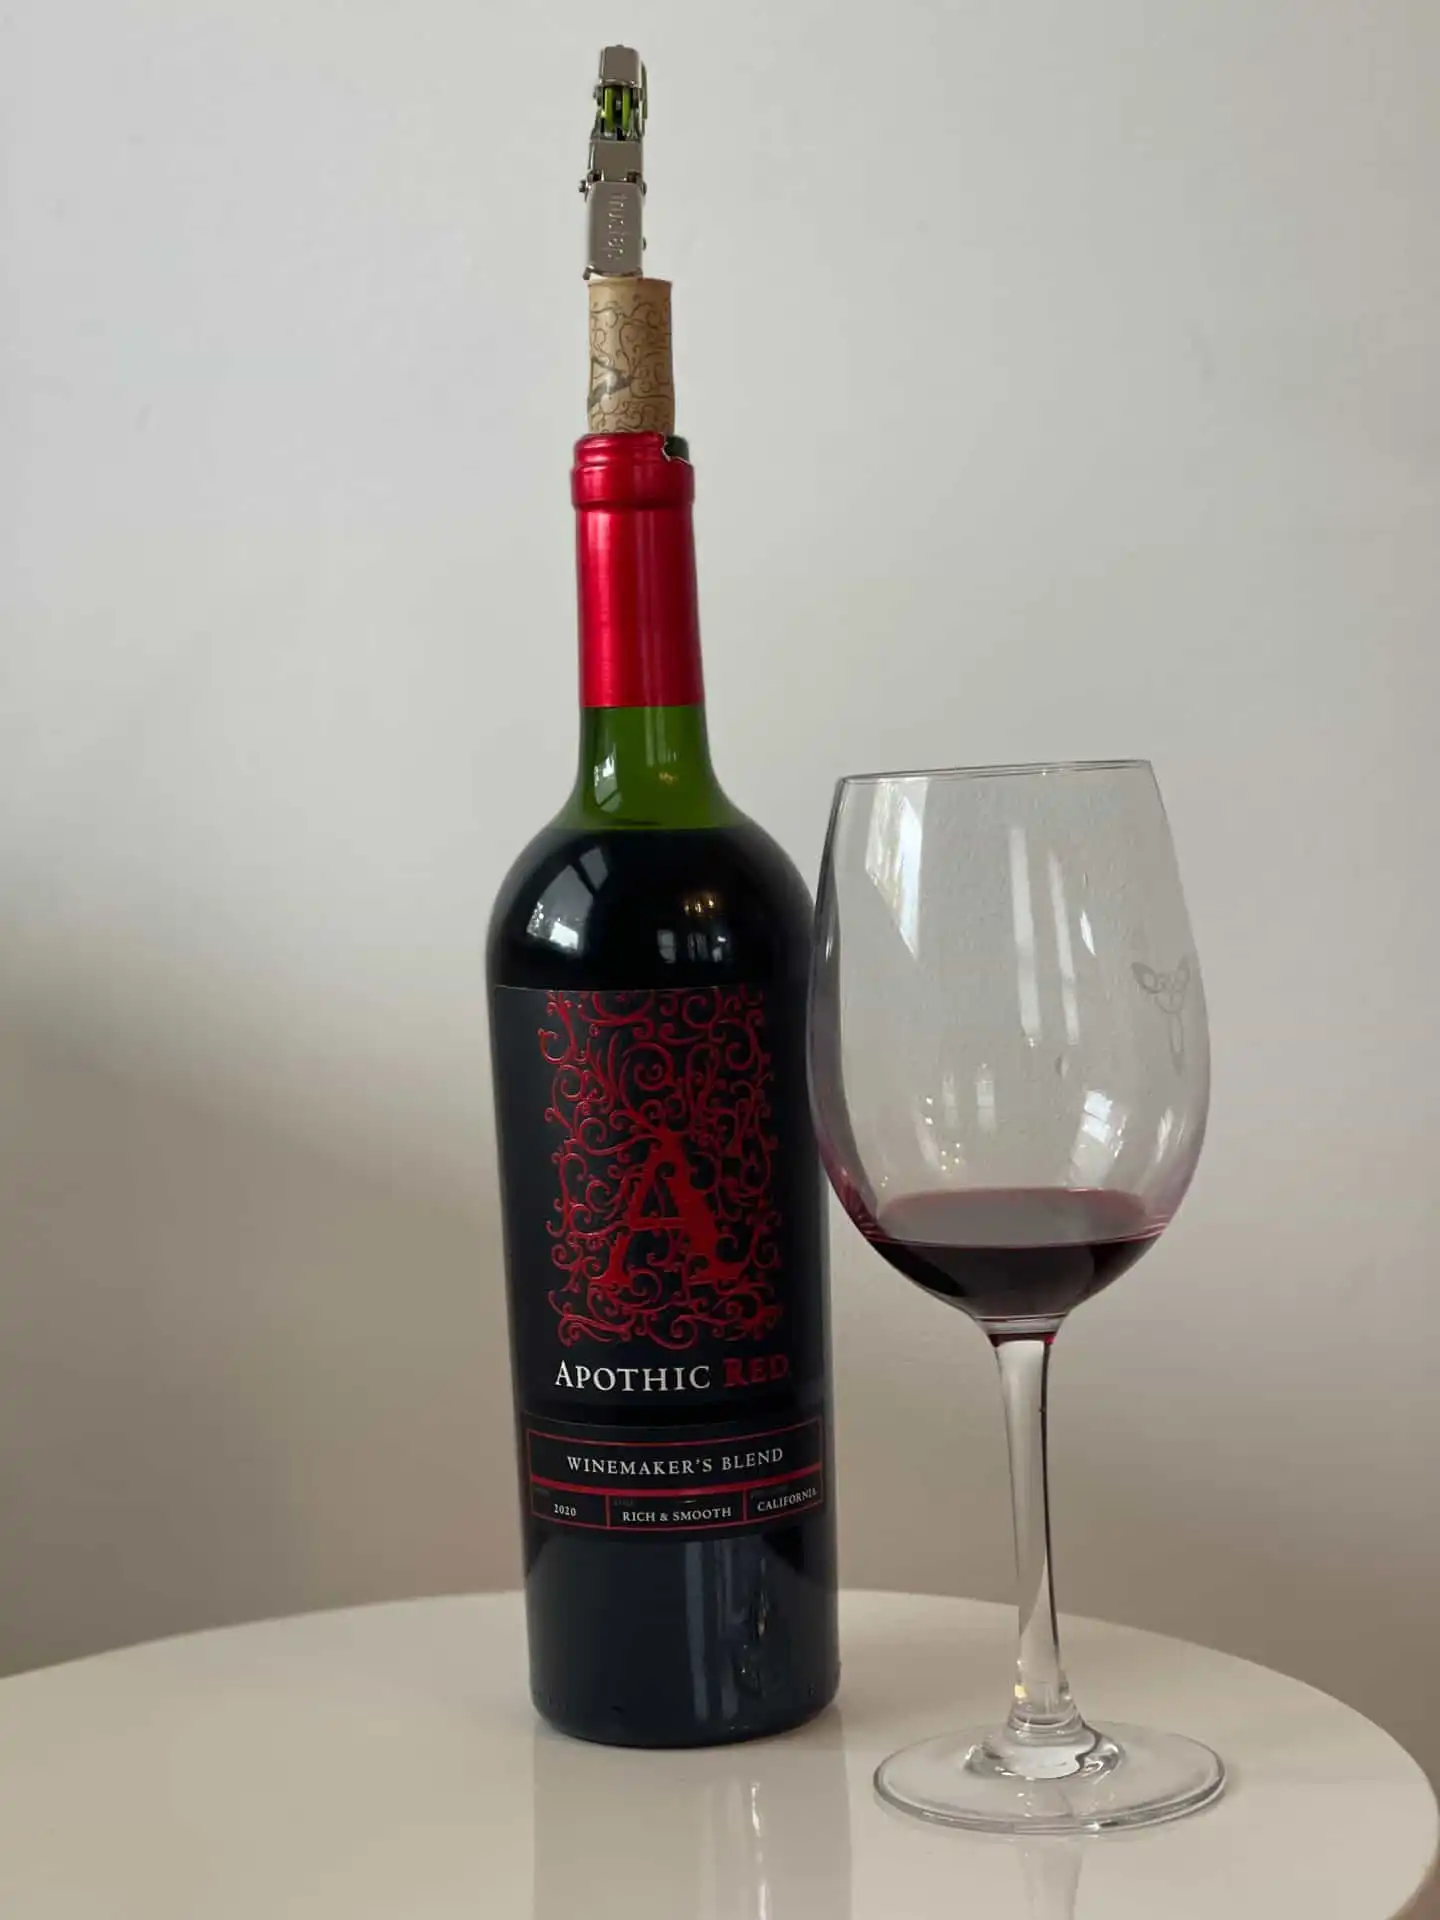 Apothic Red (winemakers blend)